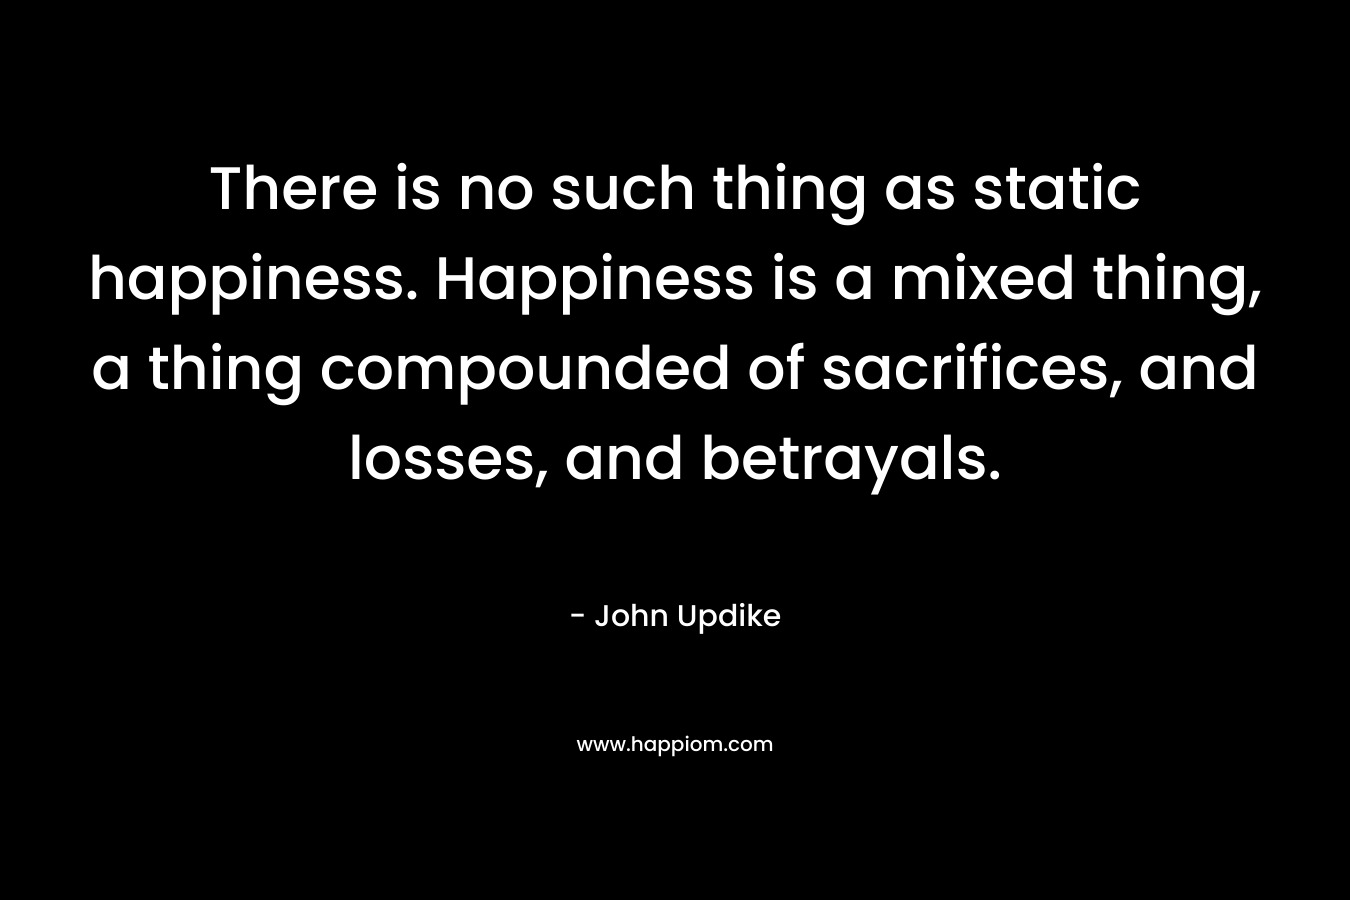 There is no such thing as static happiness. Happiness is a mixed thing, a thing compounded of sacrifices, and losses, and betrayals. – John Updike